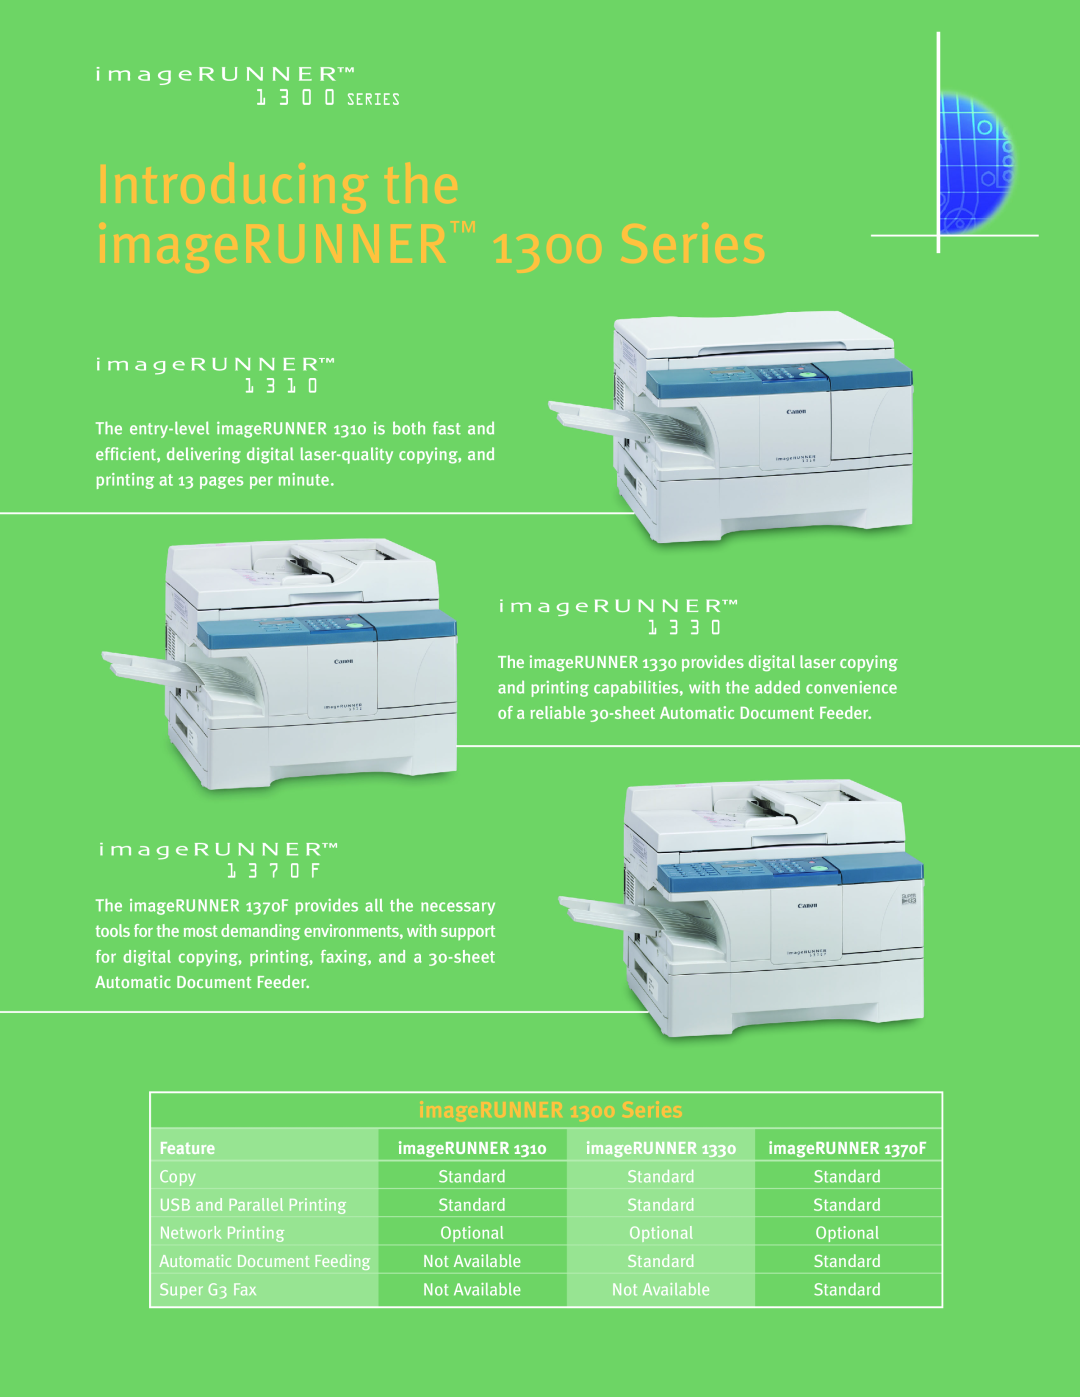 Canon manual Introducing the imageRUNNER 1300 Series, Feature 